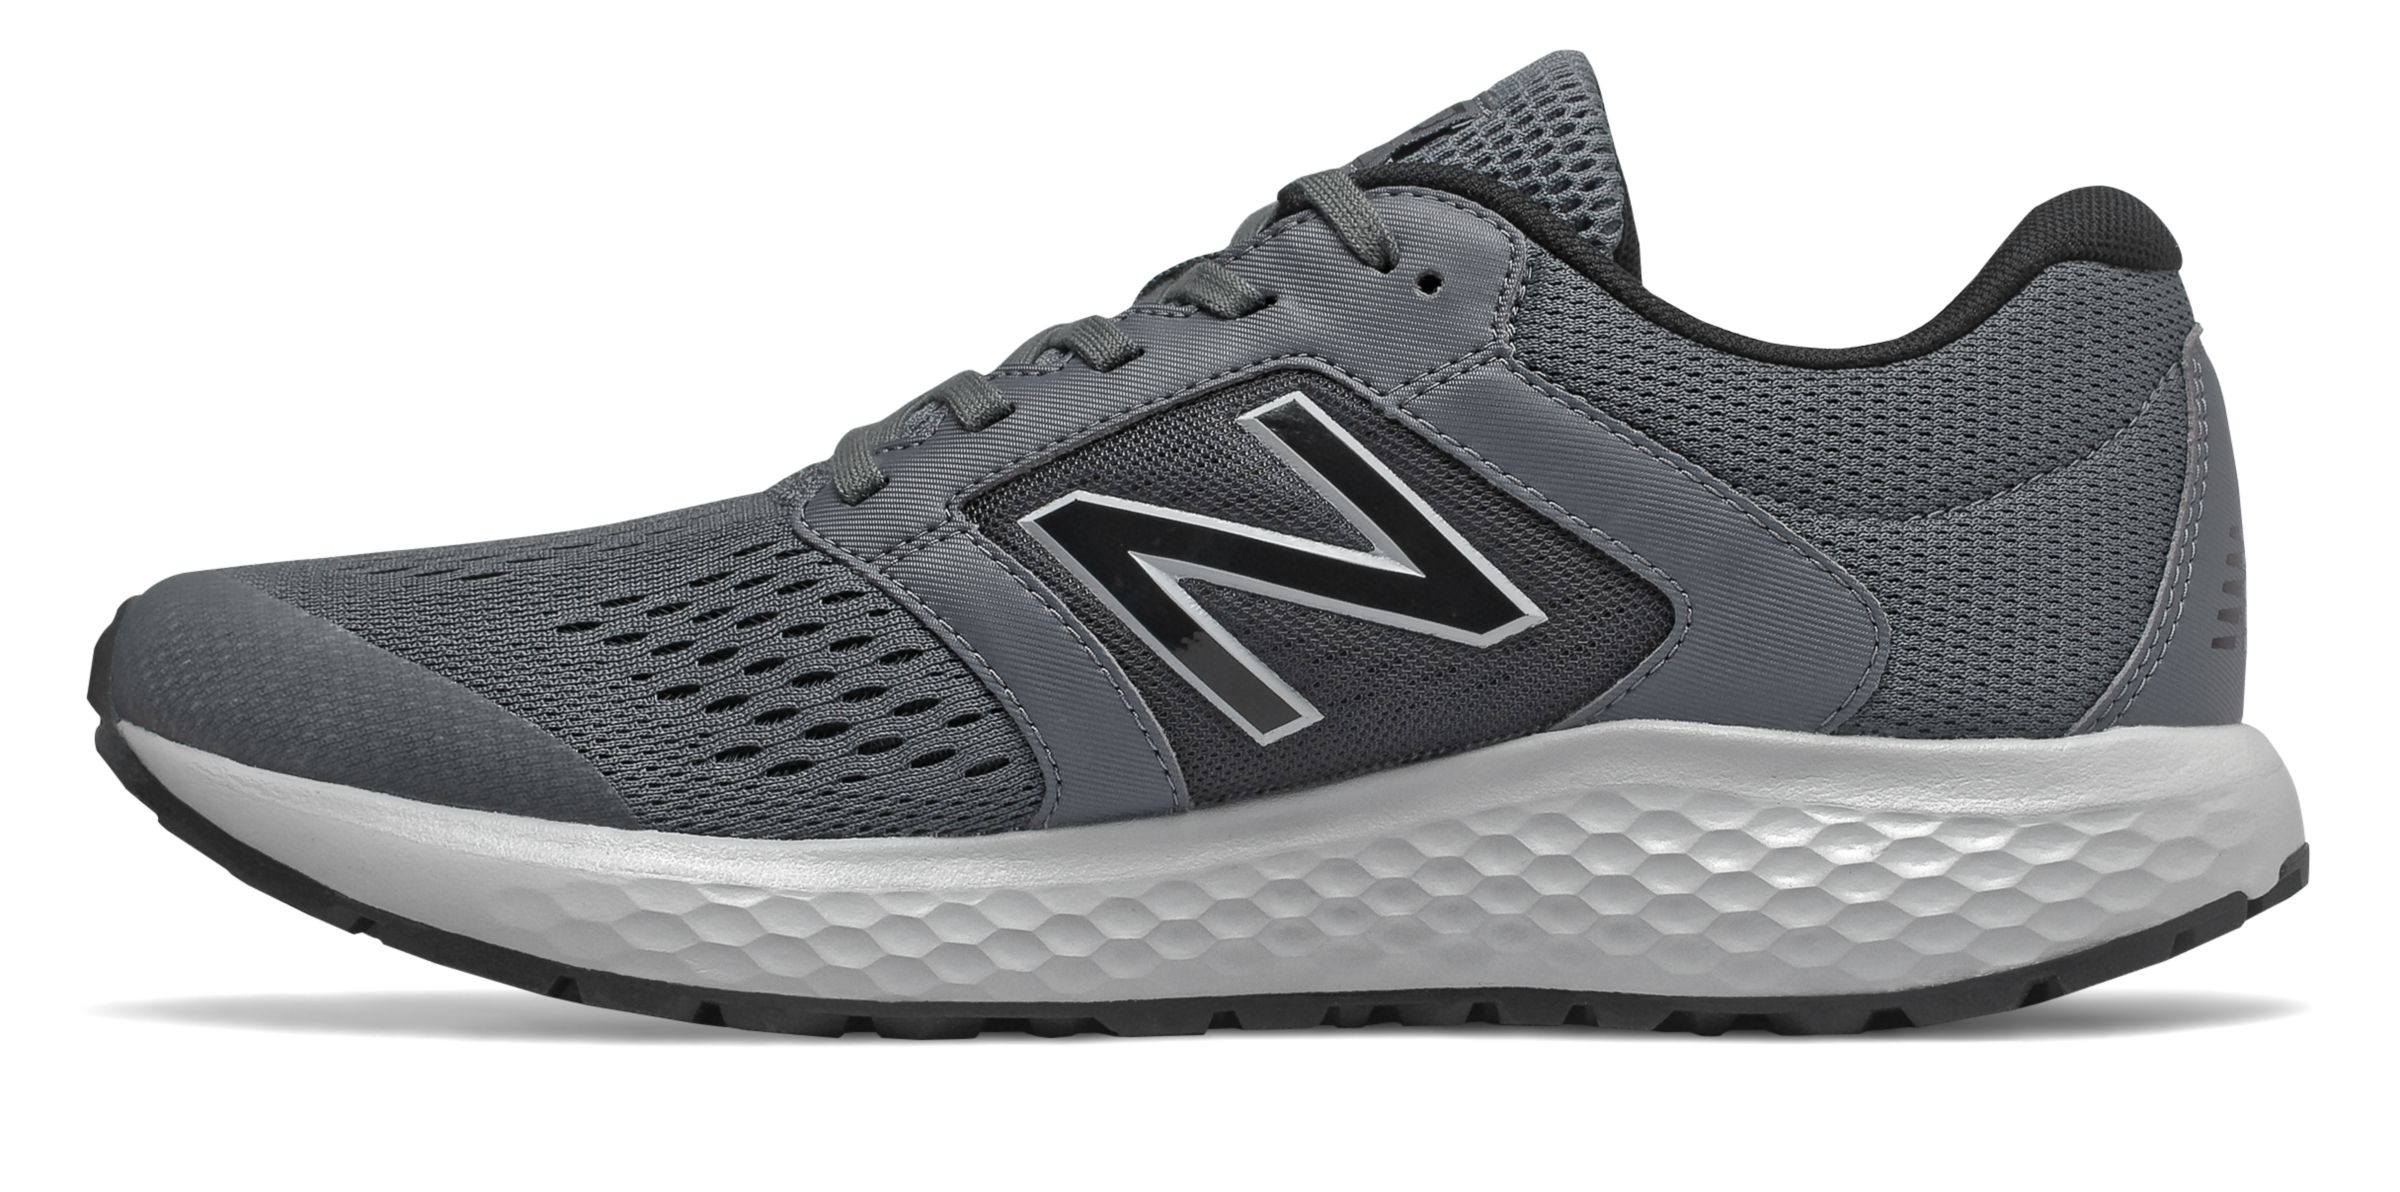 New Balance M520-V5 on Sale - Discounts Up to 38% Off on M520LS5 at Joe's New  Balance Outlet